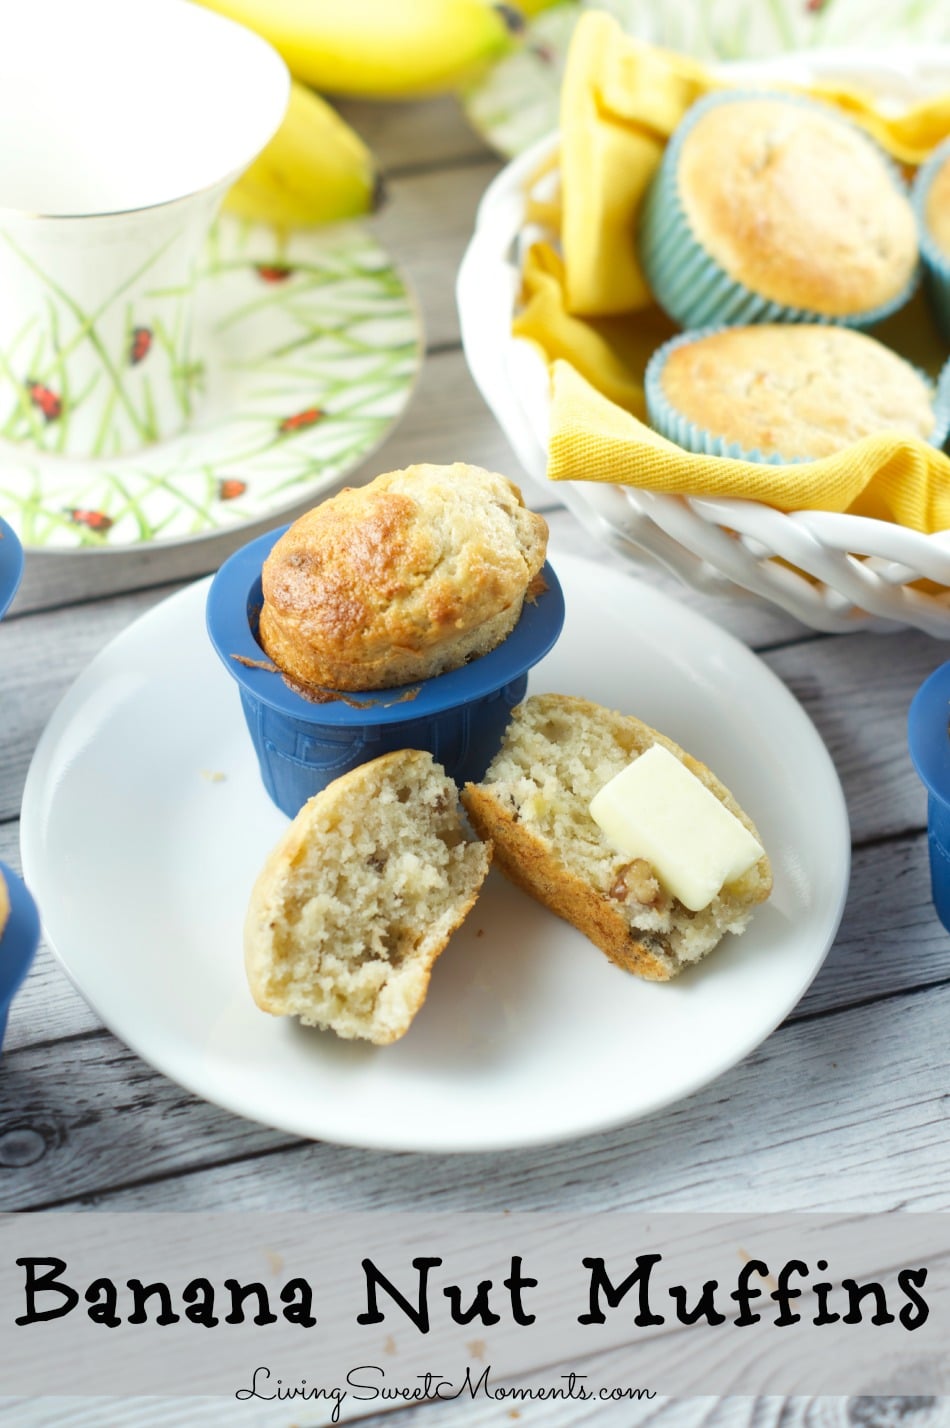 Banana Nut Muffins Recipe - They makes delicious, moist and sweet muffins. The secret is the use of sour cream in the batter. It gives them tons of flavor.